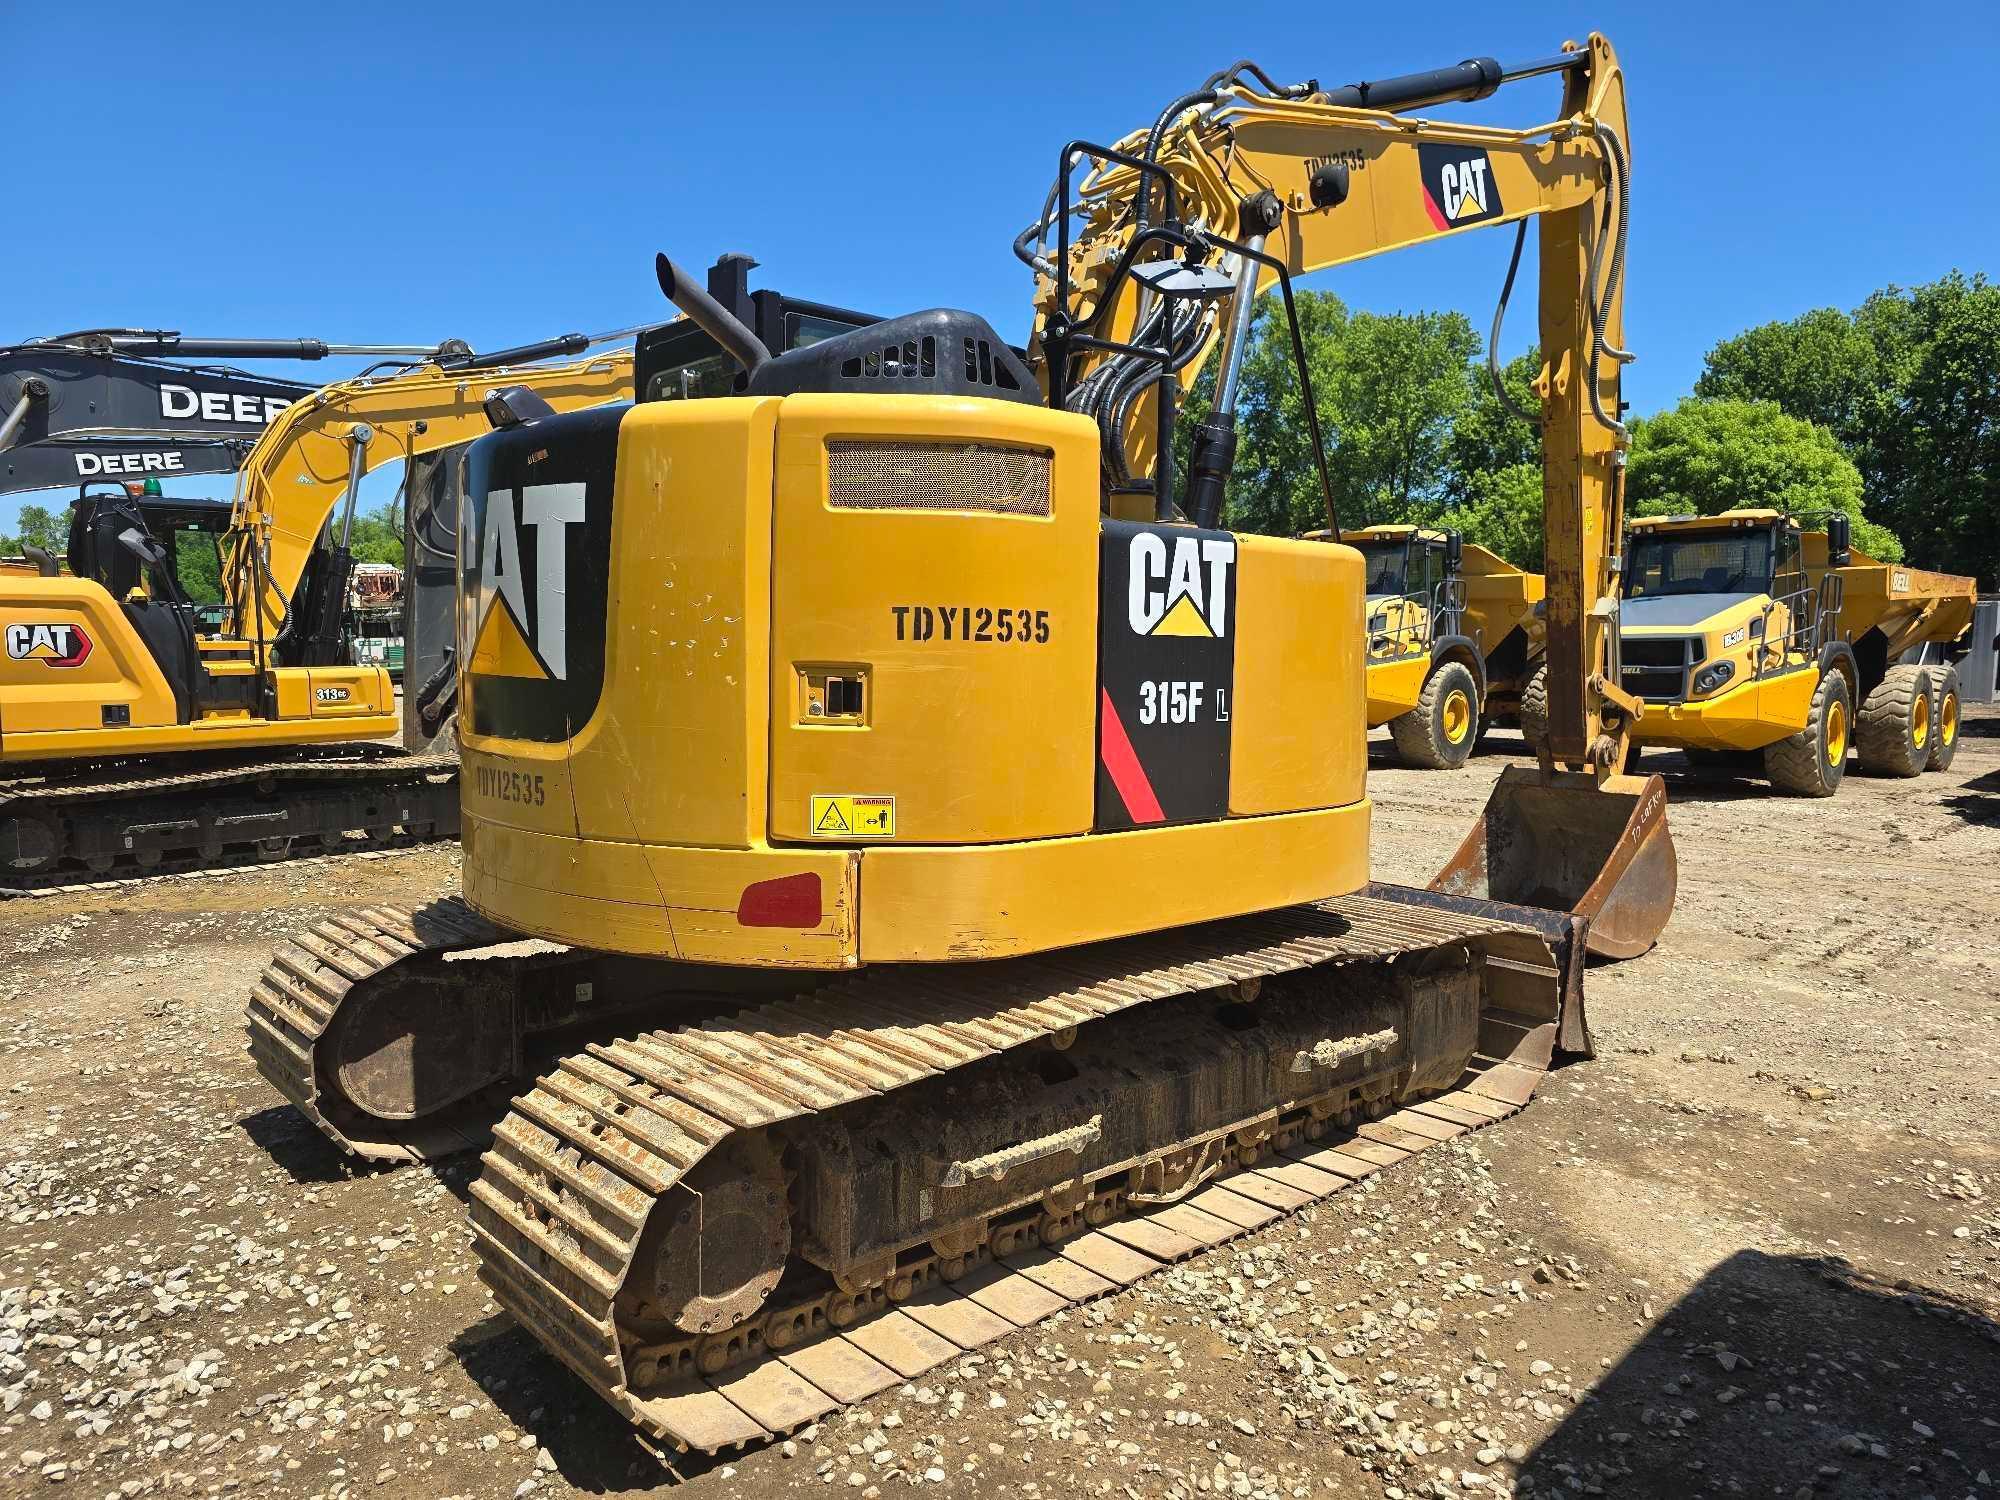 2019 CAT 315FLCR HYDRAULIC EXCAVATOR SN:TDY12535 powered by Cat diesel engine, equipped with Cab,